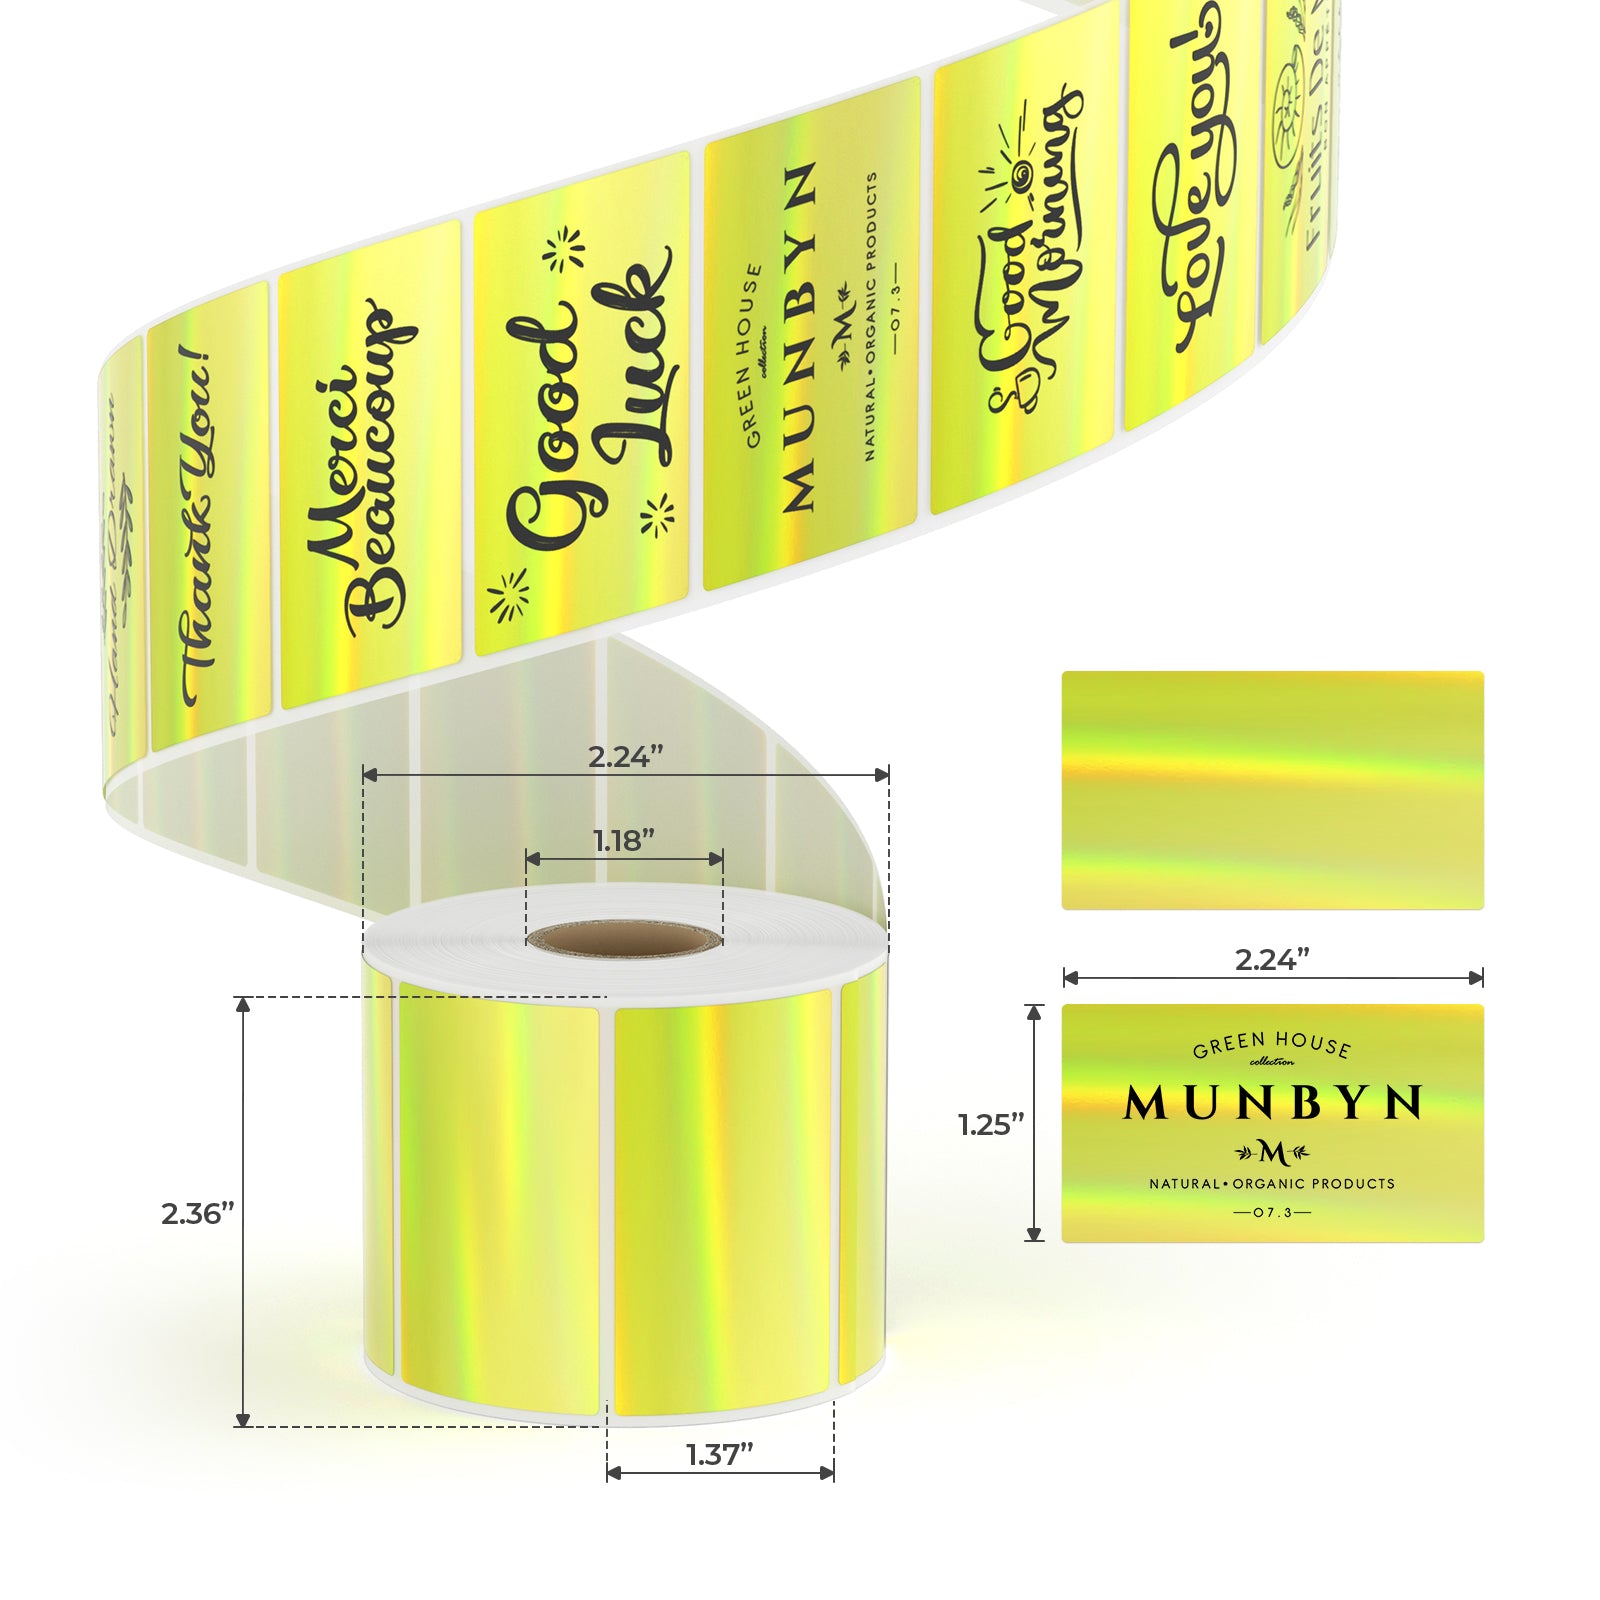 MUNBYN's versatile gold holographic rectangle thermal labels measure 1.25" x 2.24", with 250 labels per roll.